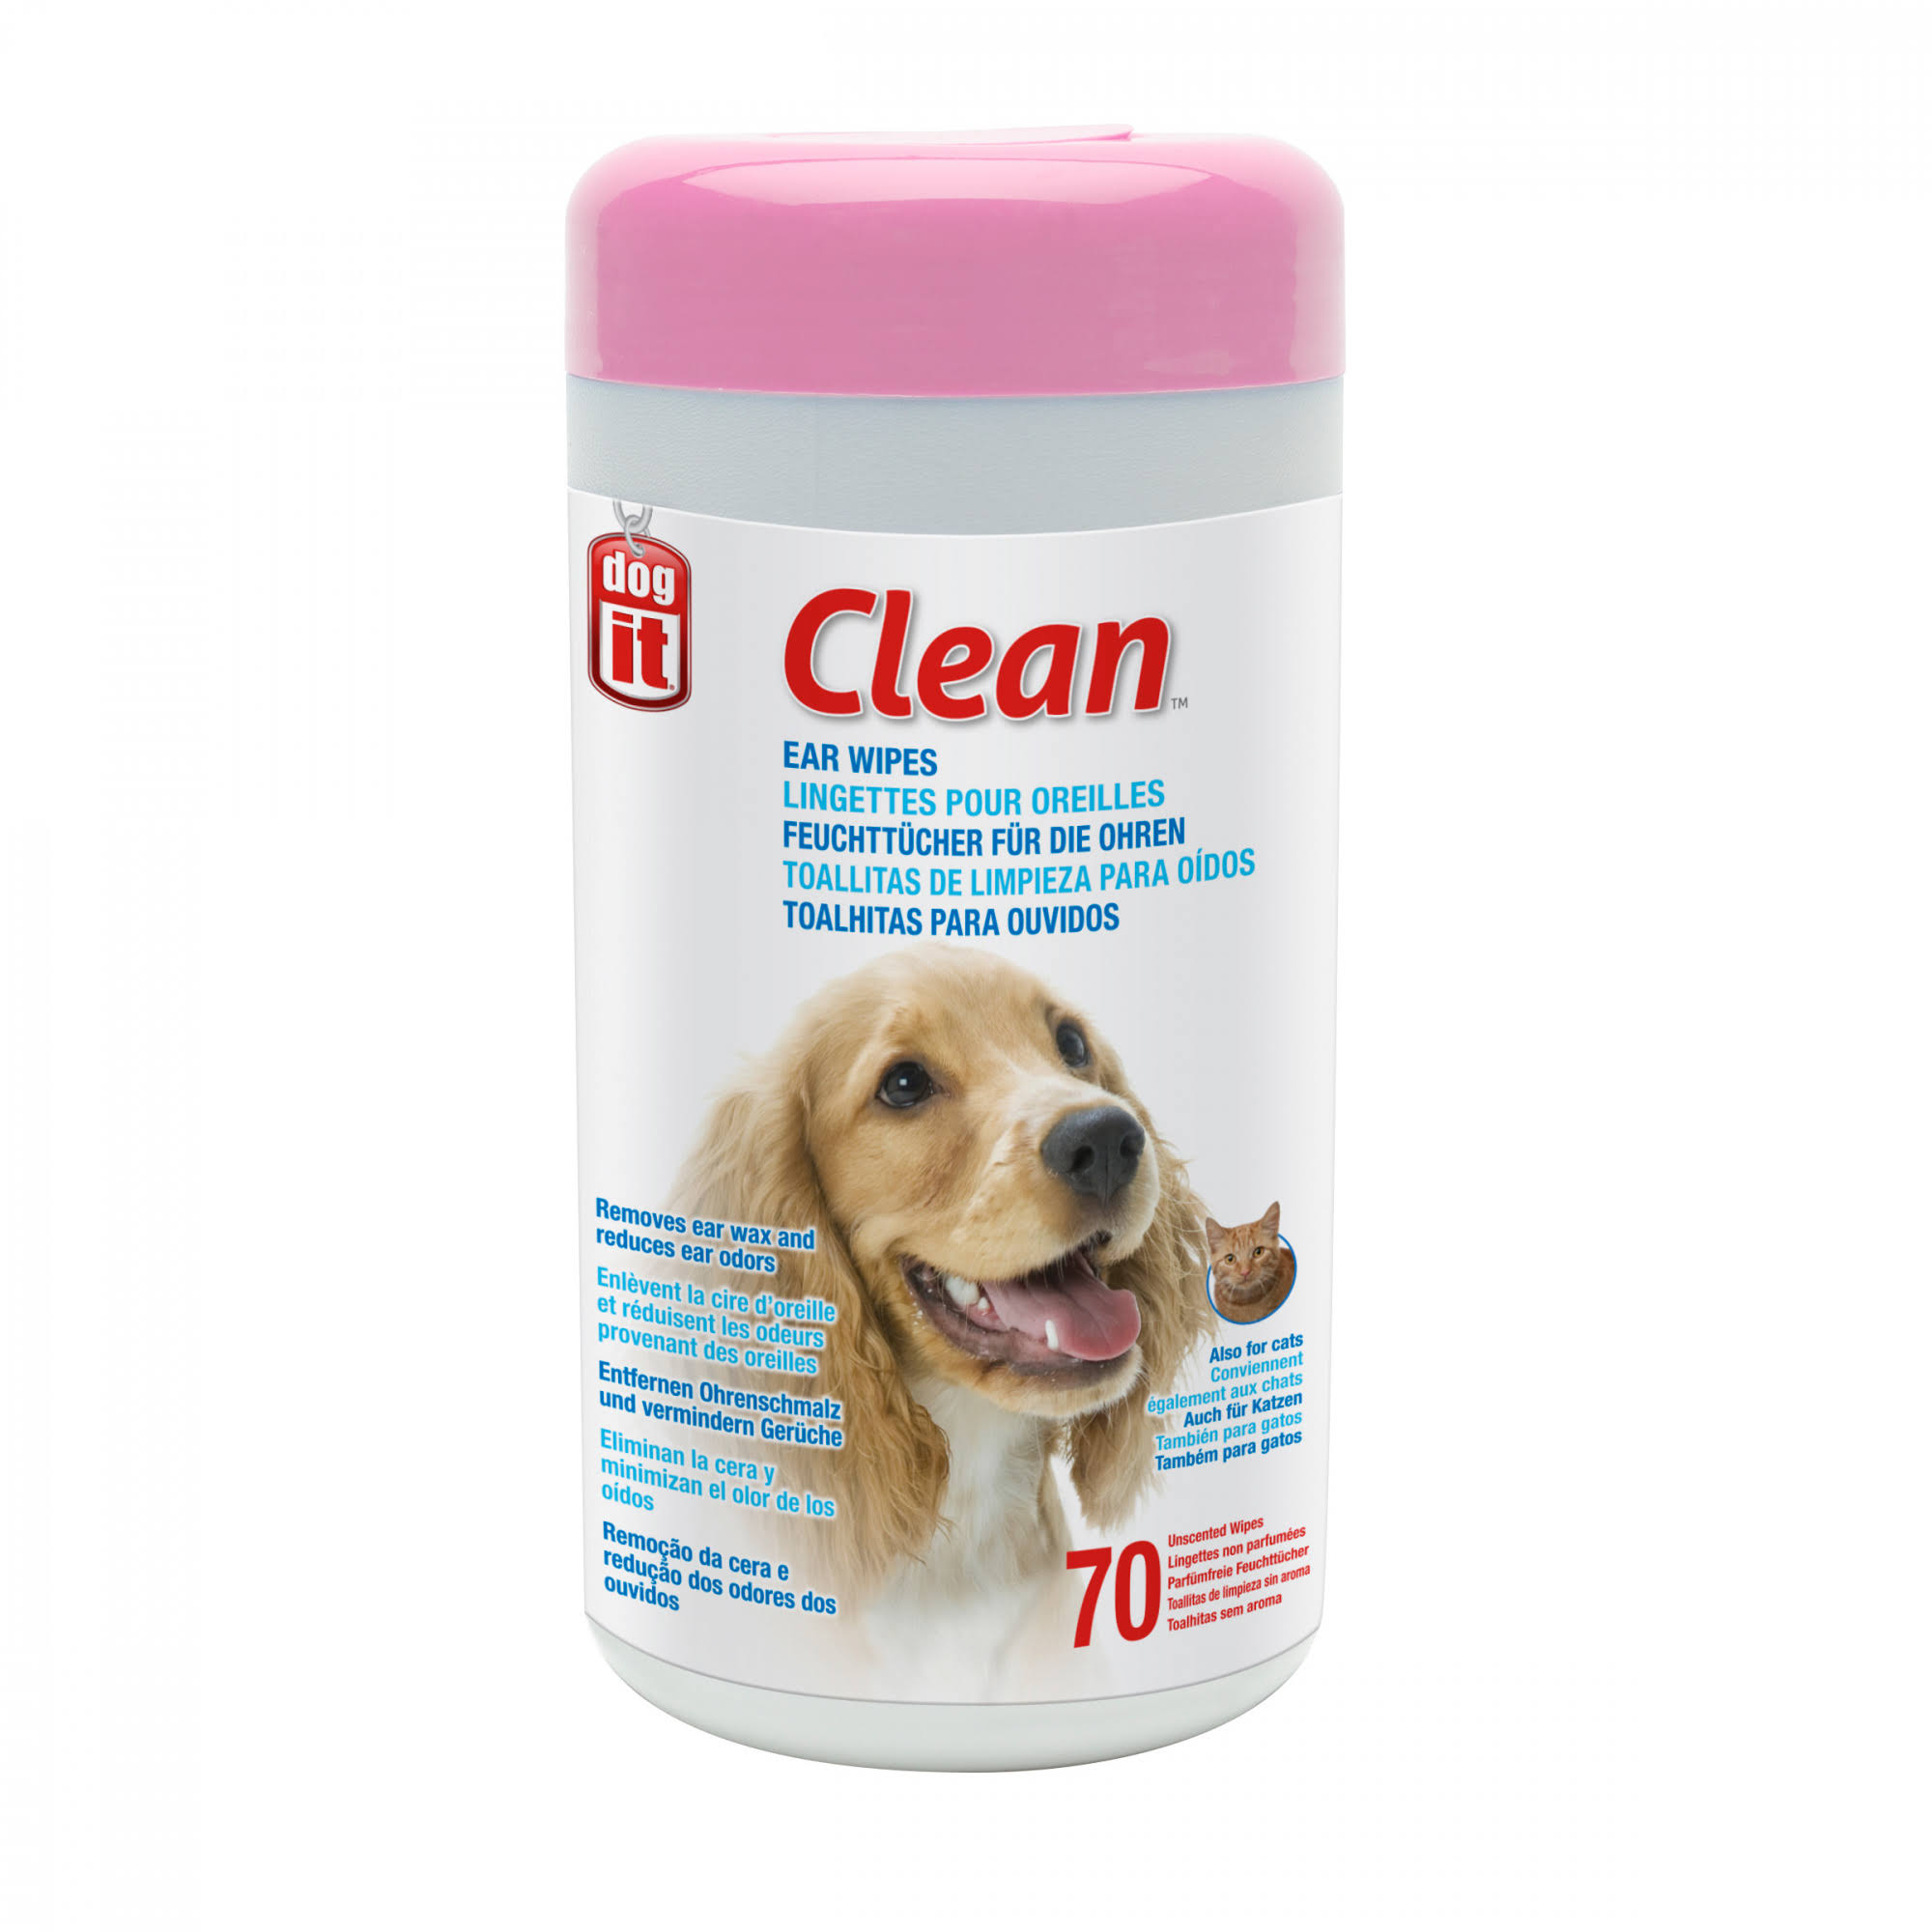 Dogit Clean Ear Wipes - 70ct